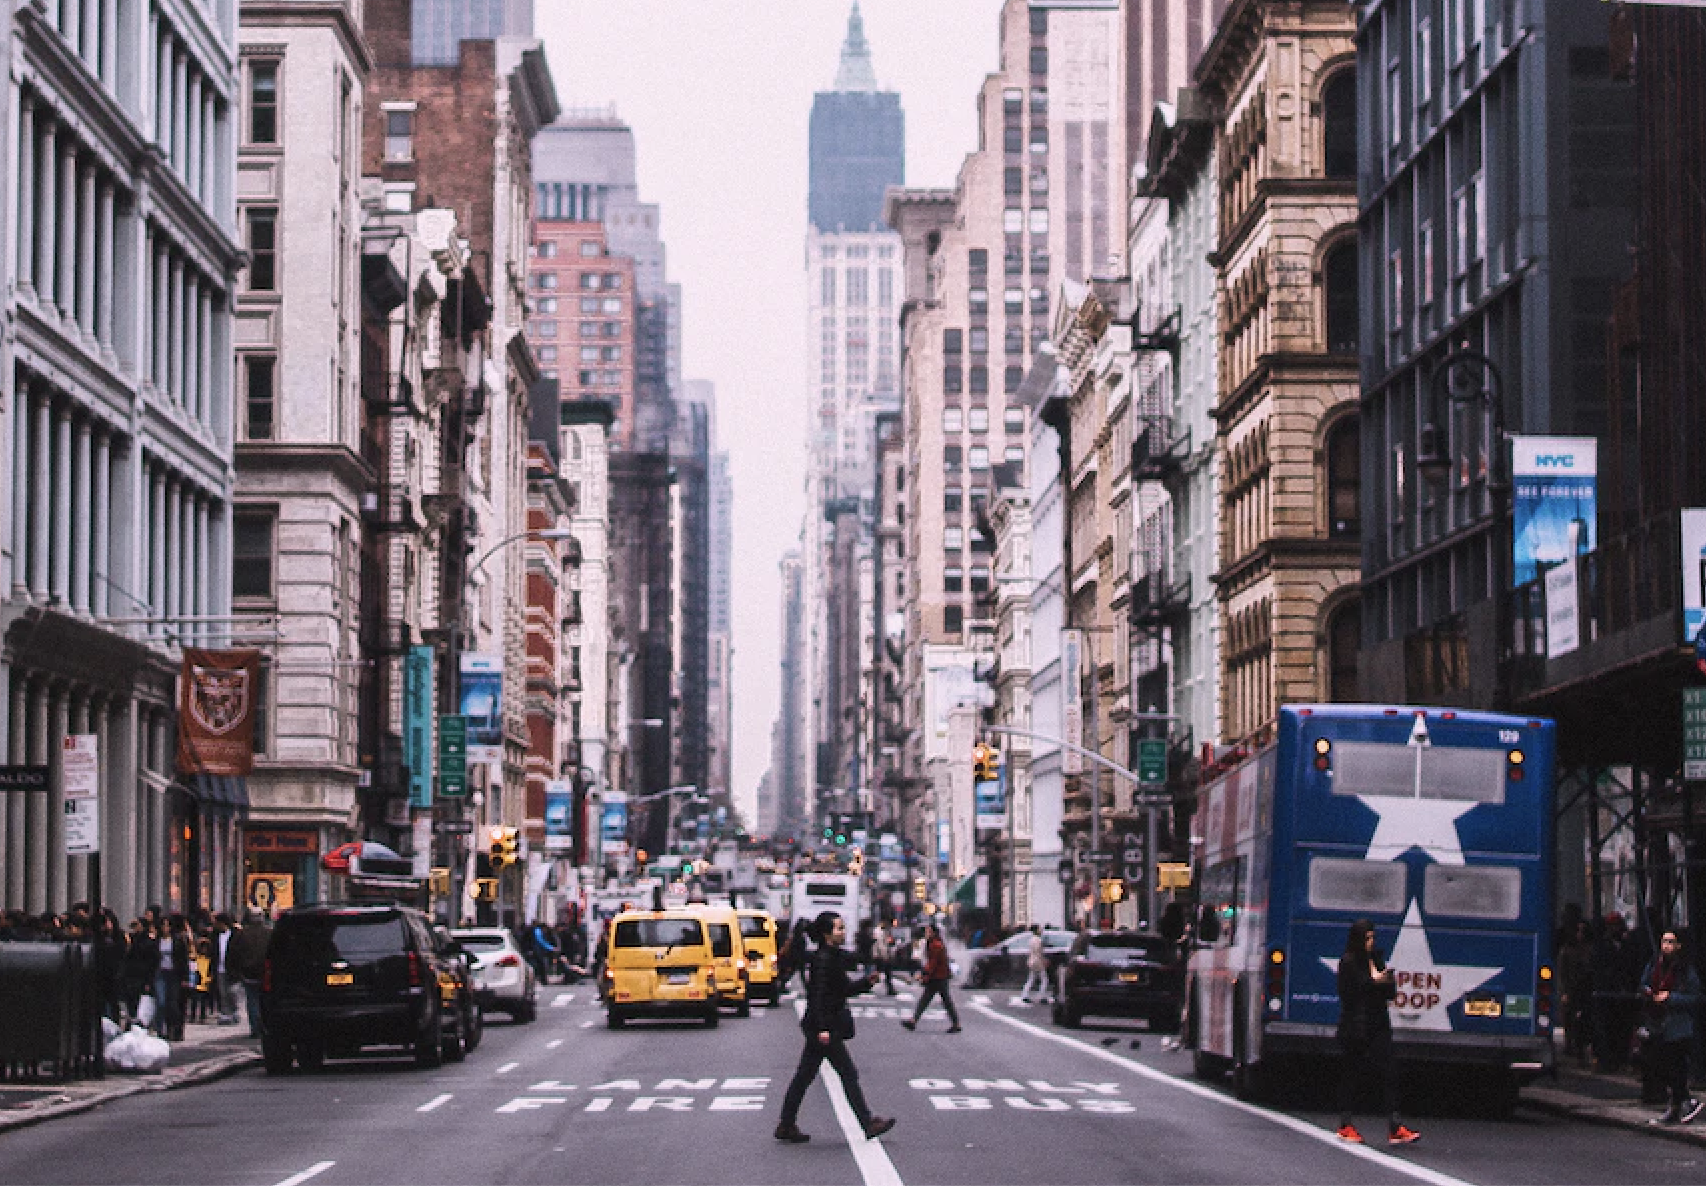 A street in New York City